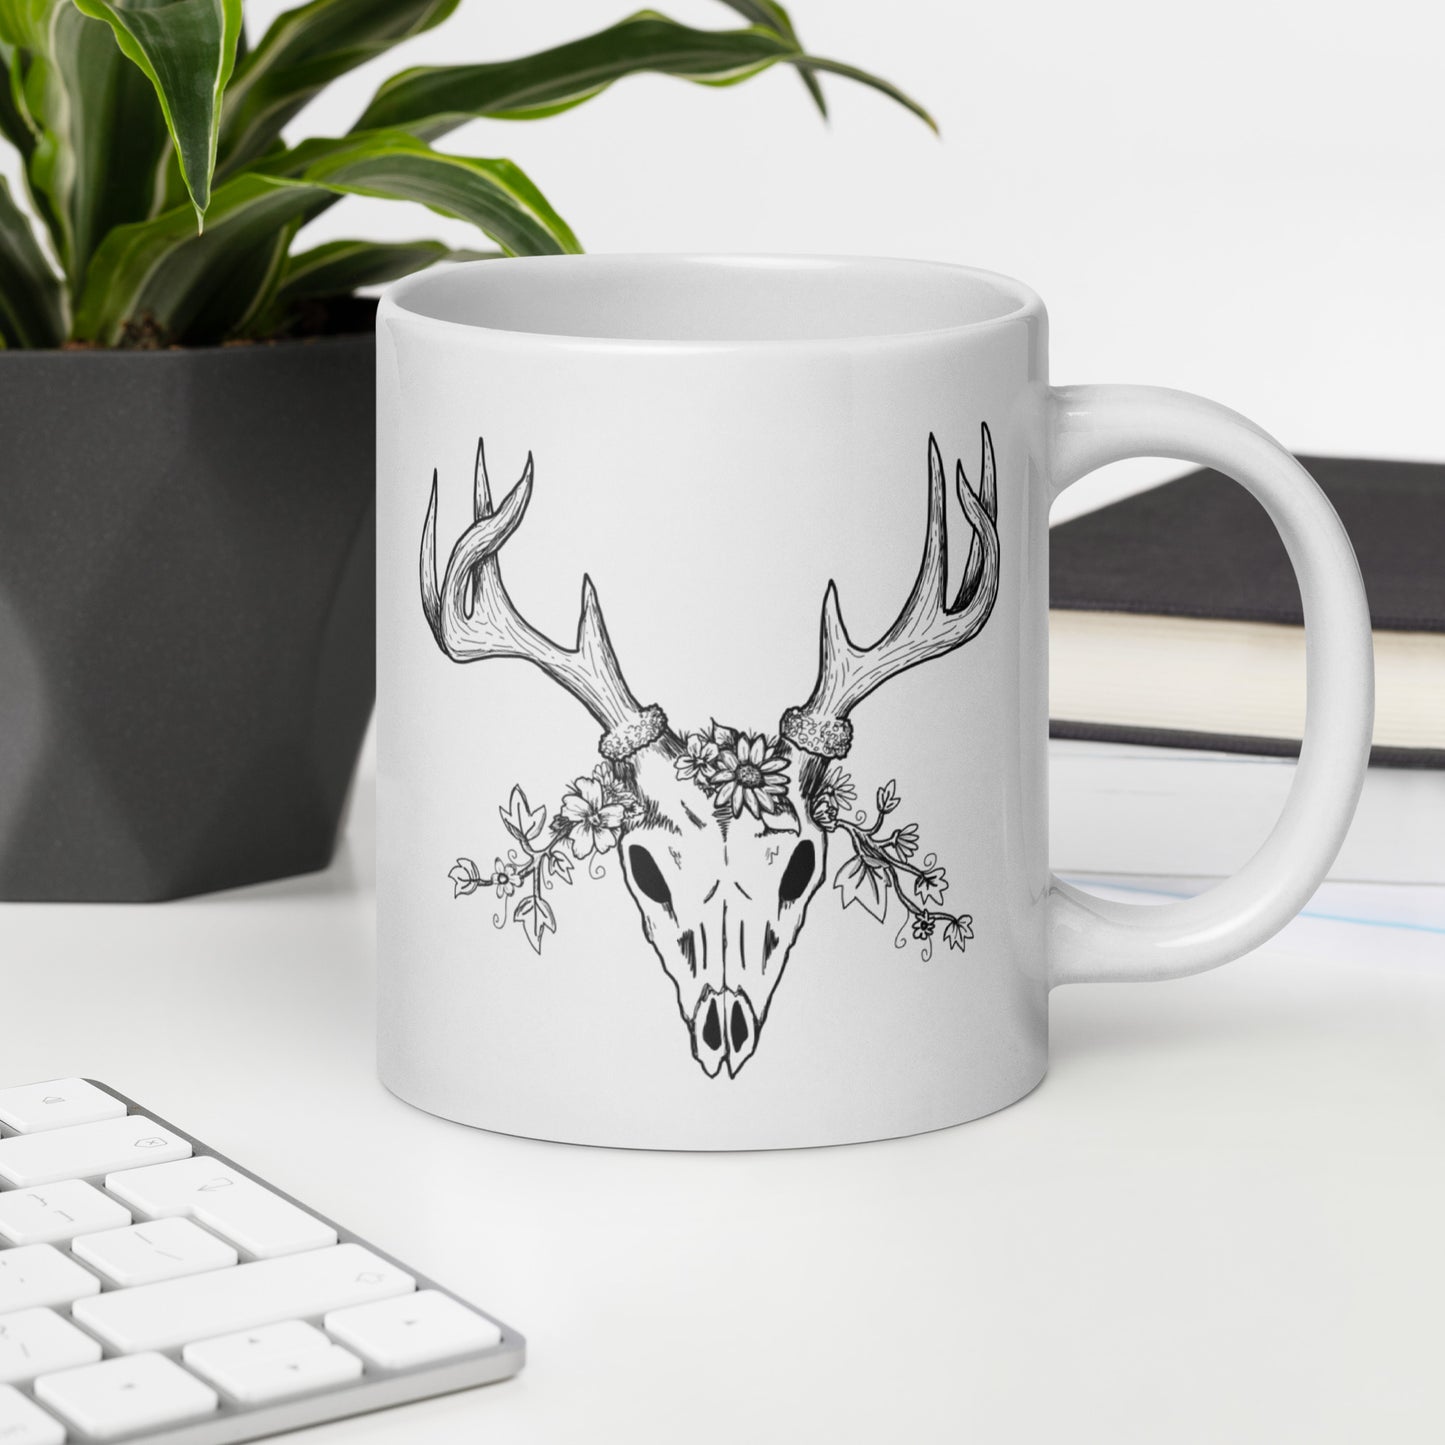 20 ounce white ceramic mug. Features illustrated deer skull wreathed in flowers on one side and Drop dead gorgeous text on the other side. Dishwasher and microwave safe. Shown on desk by keyboard, book, and potted plant.